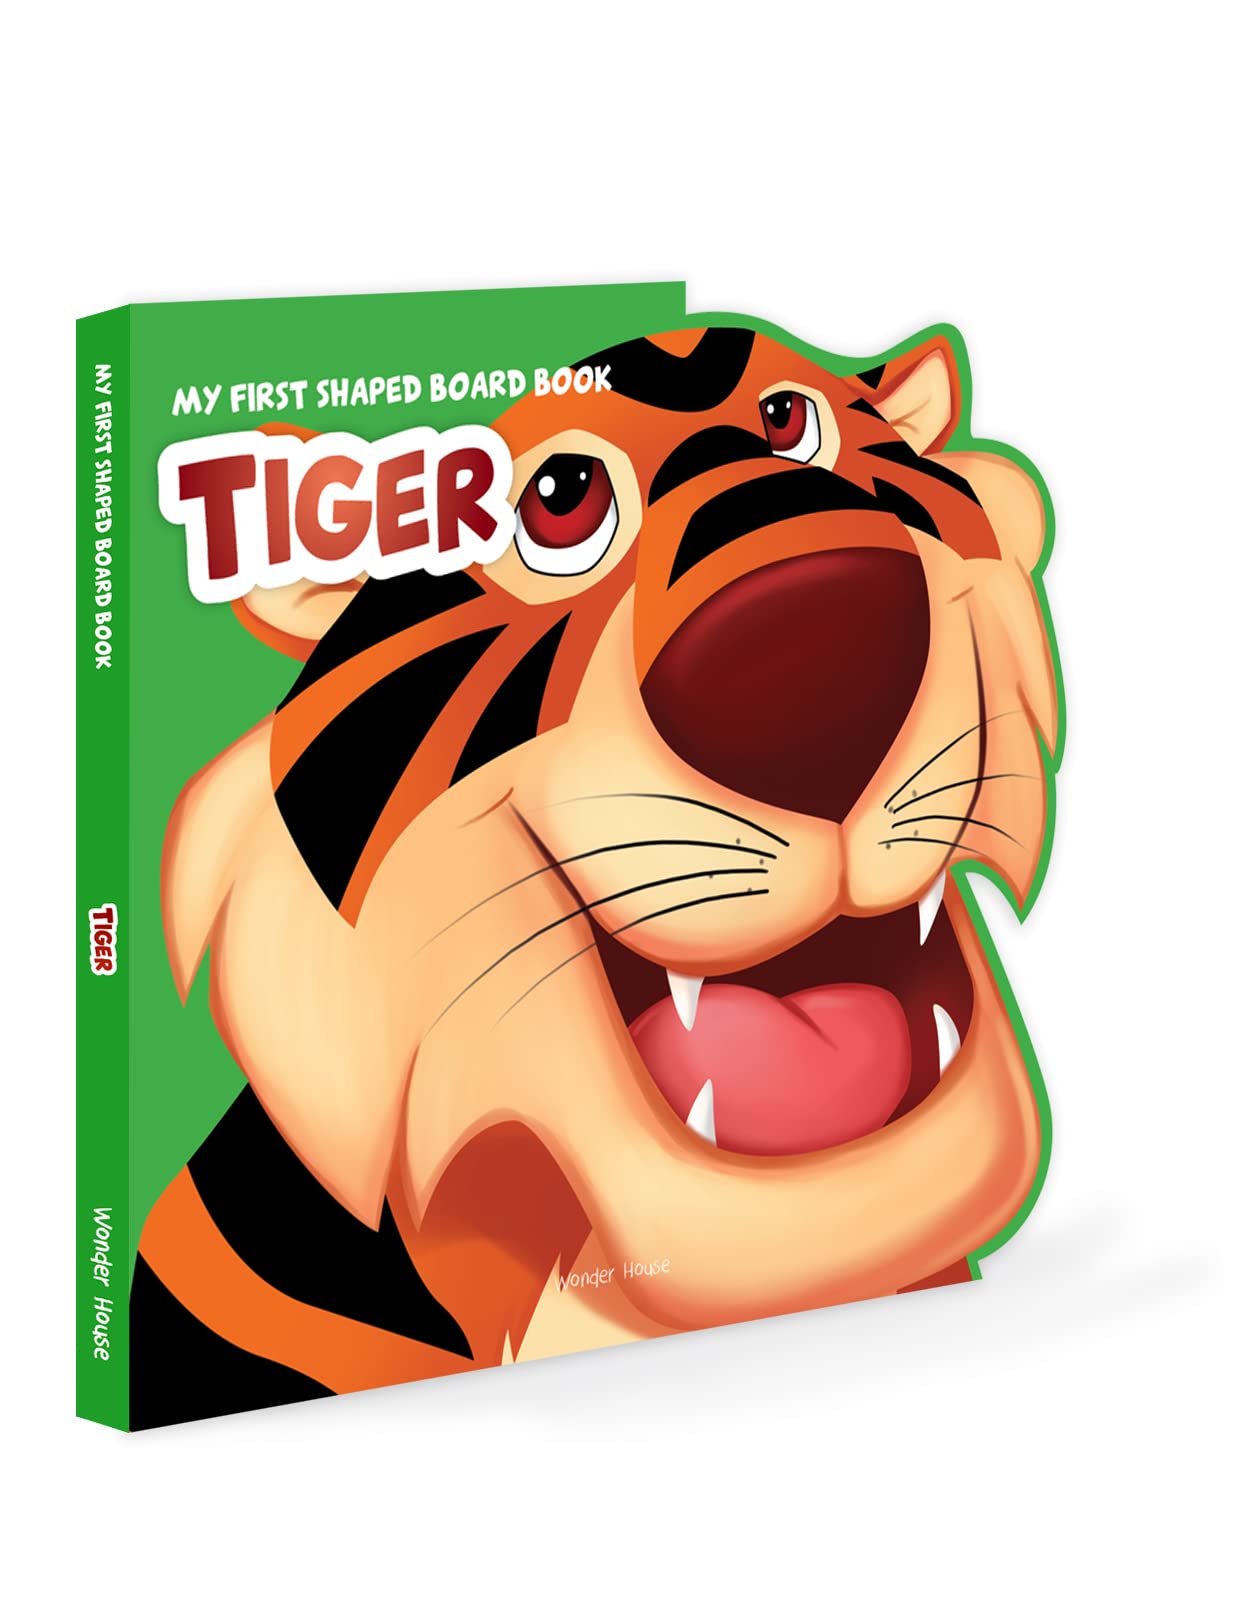 My First Shaped Board Book - Tiger